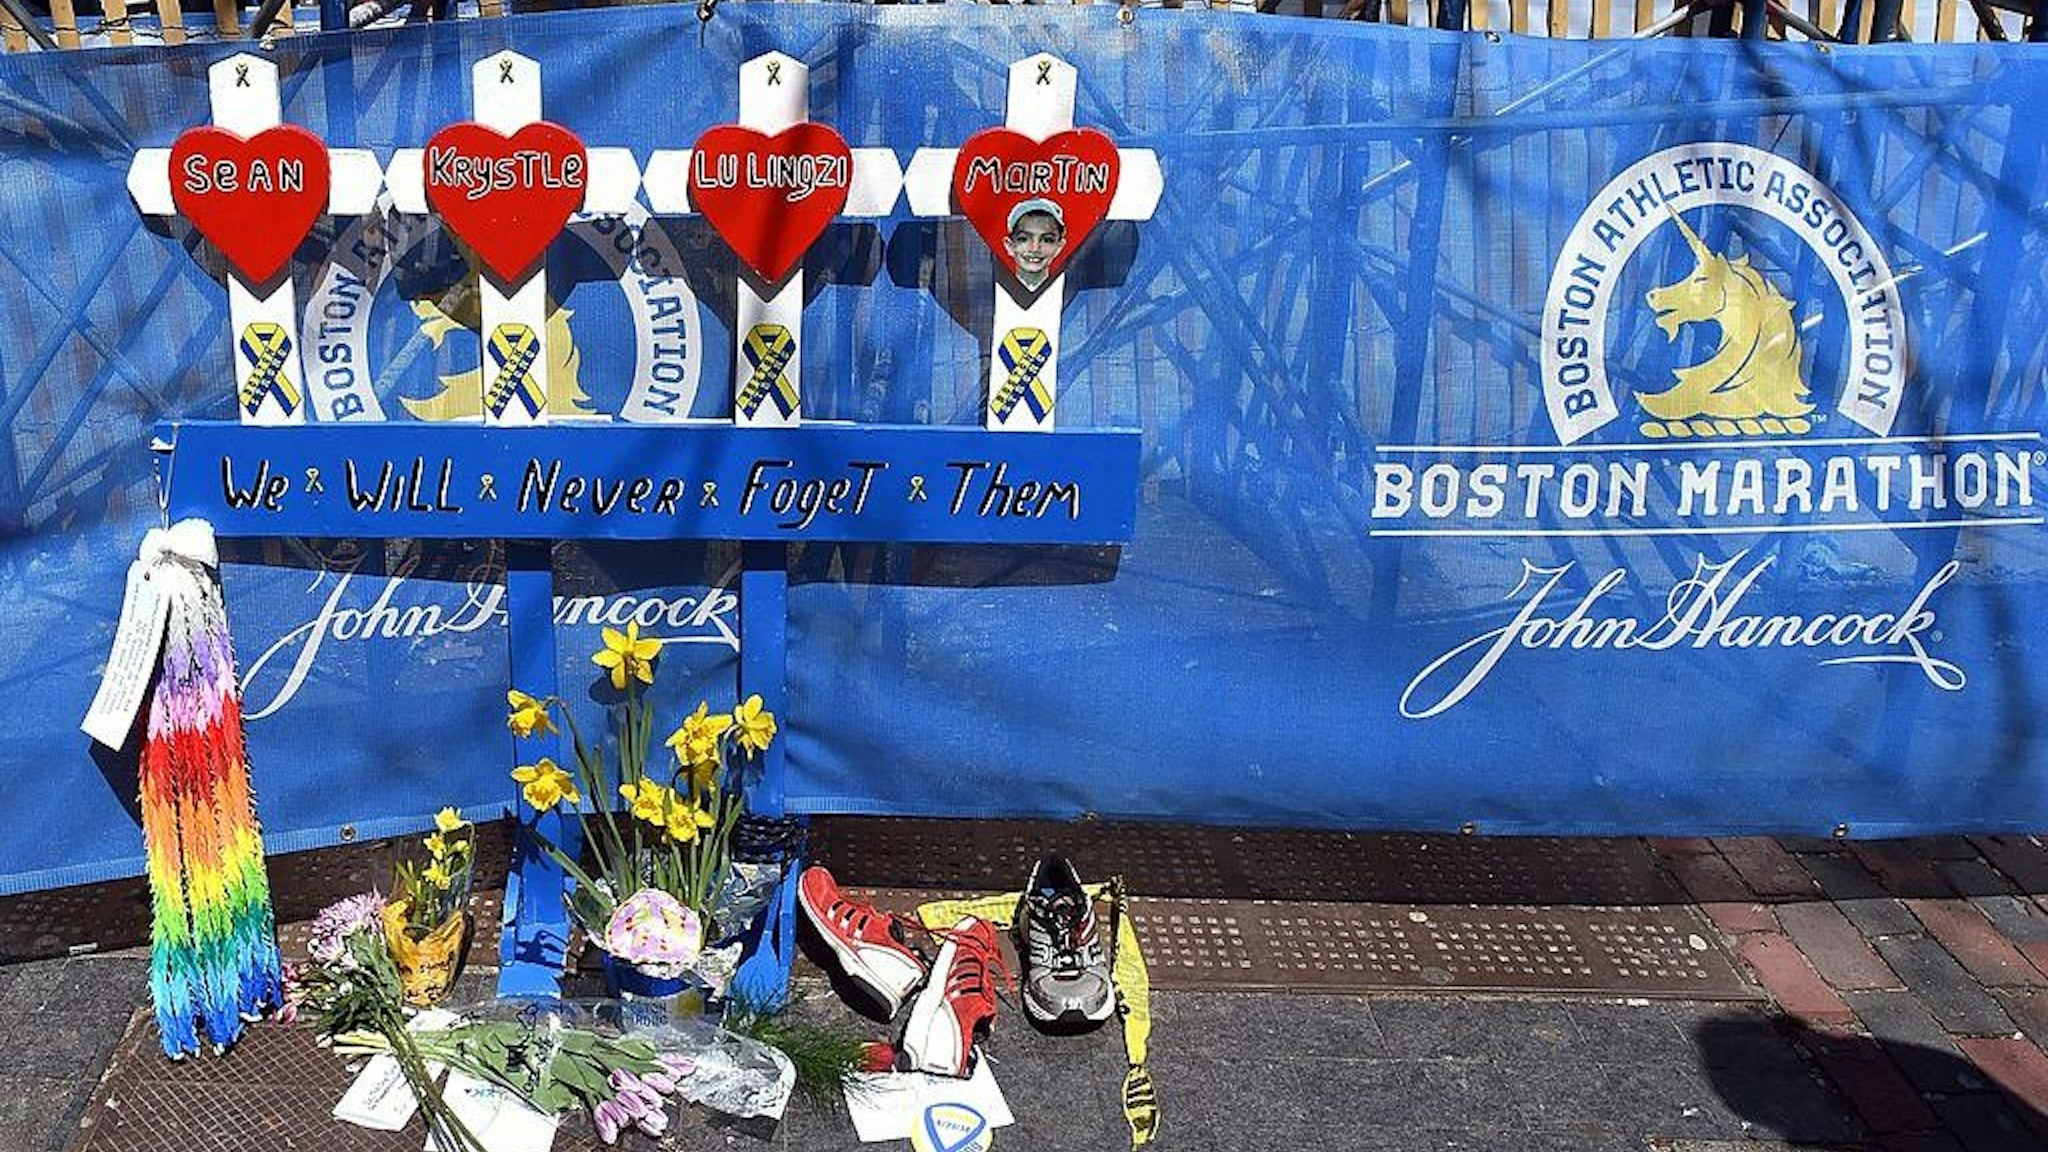 A makeshift memorial set up at the spot where the bomb went off near the finish line, on the eve of the 2014 Boston Marathon April 20, 2014 in Boston, Massachussetts. The Boston Marathon returns Monday under heavy security after last year's deadly bombings, as a near record 35,660 runners get set to compete. One million people are expected to line the route in a show of defiance and to honor the victims and survivors of the attacks which killed three people and wounded more than 260. AFP PHOTO / Timothy A. CLARY (Photo credit should read TIMOTHY A. CLARY/AFP via Getty Images)